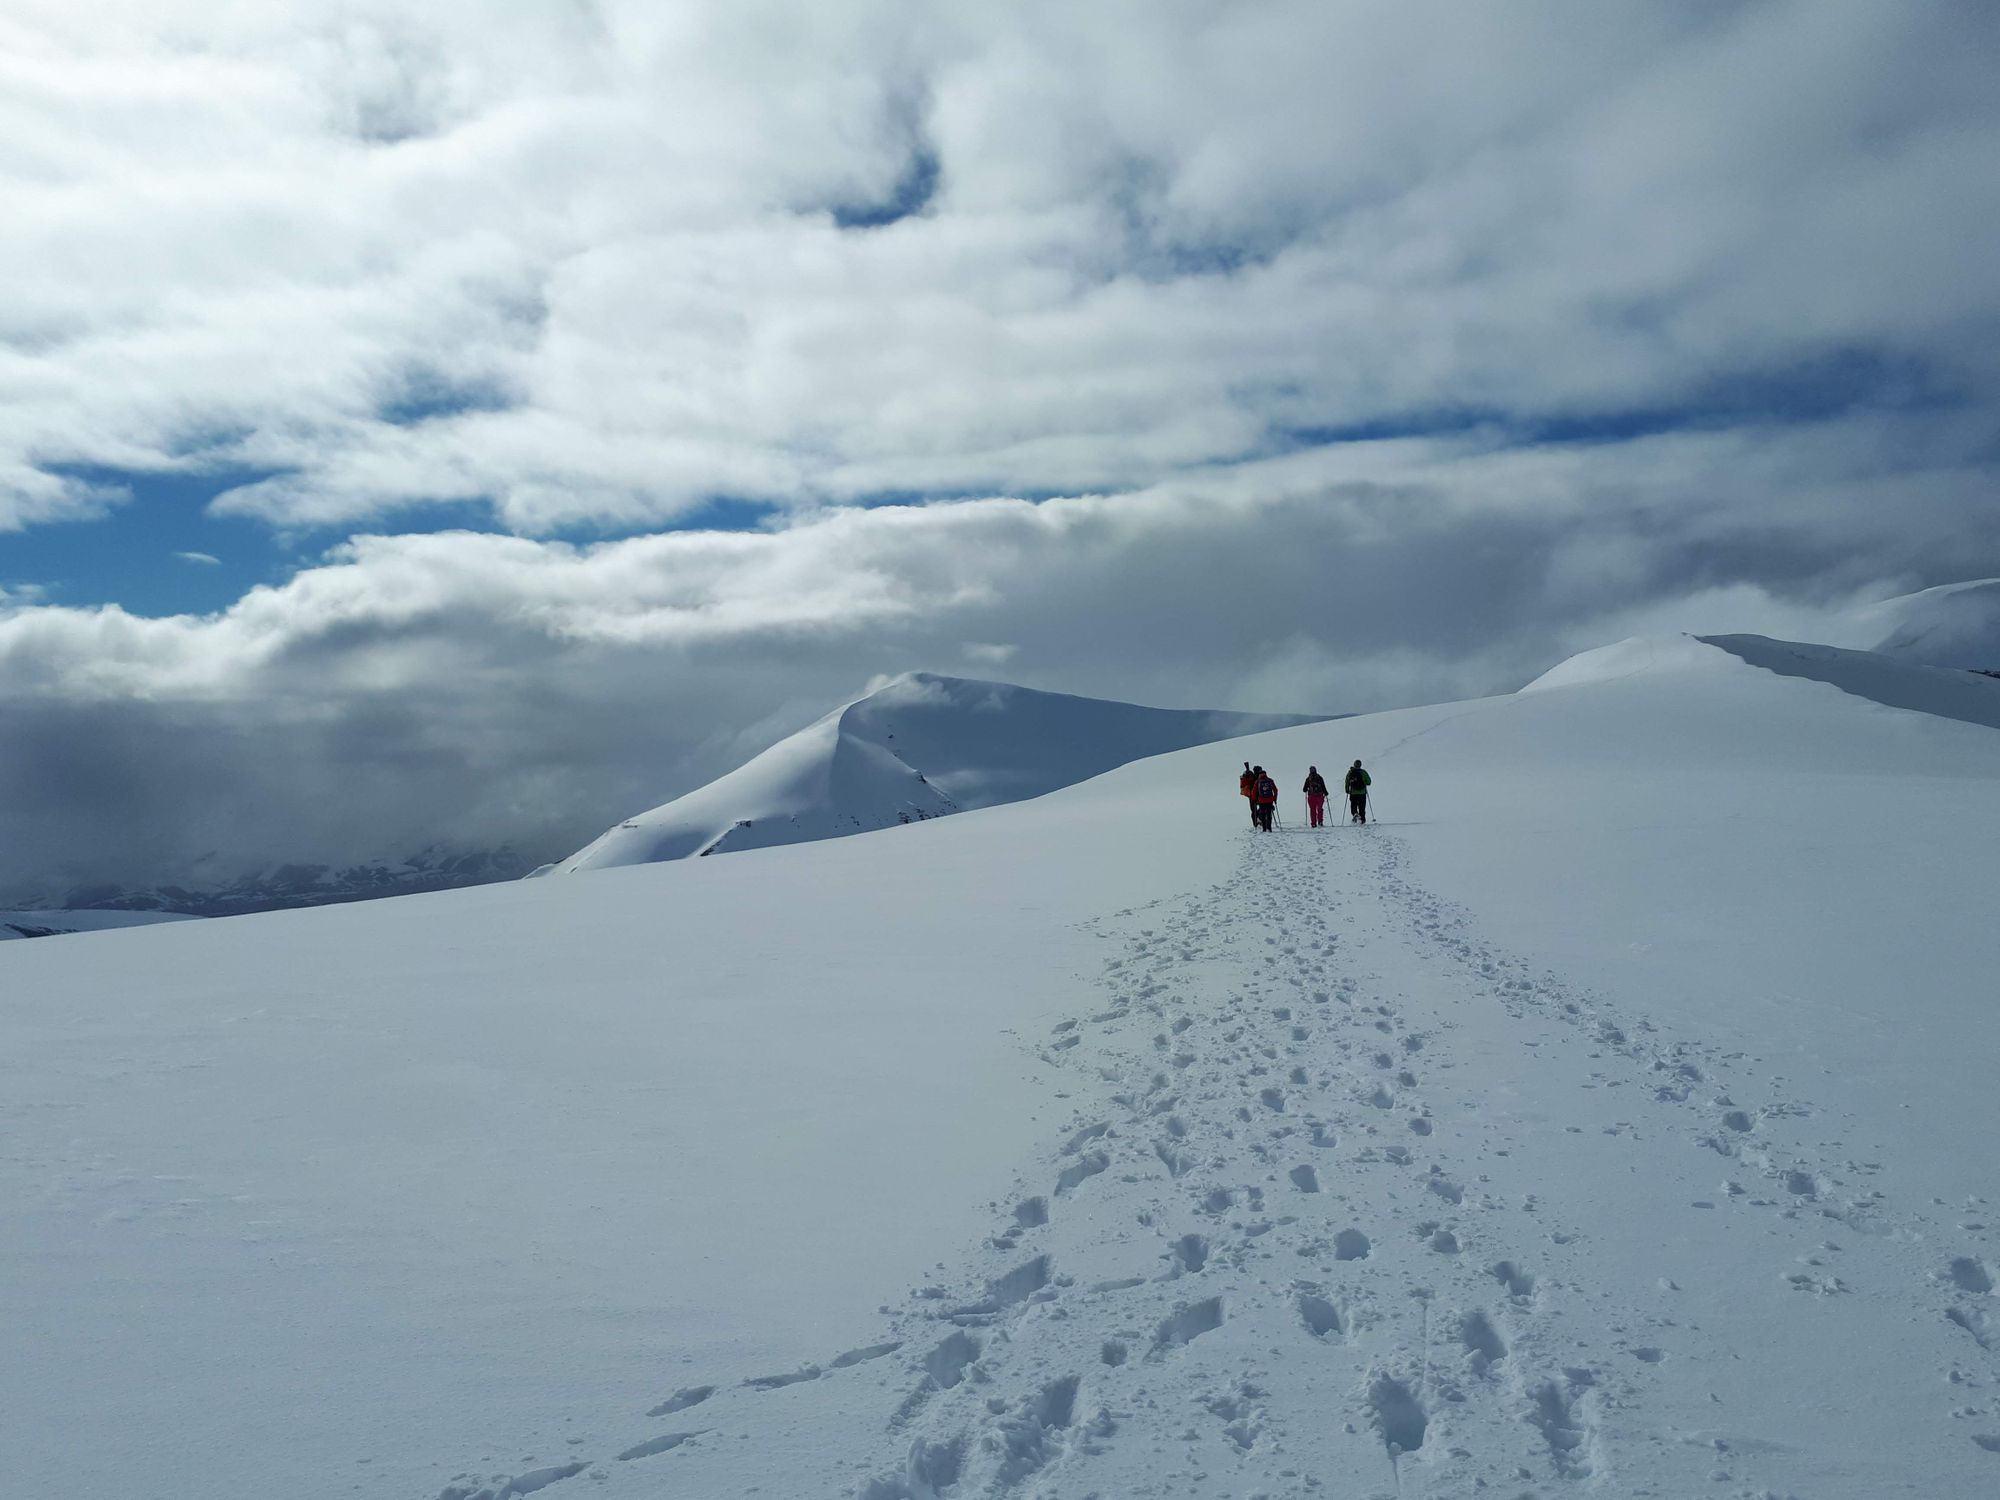 A group of hikers in the snow near Longyearbyen, Svalbard.